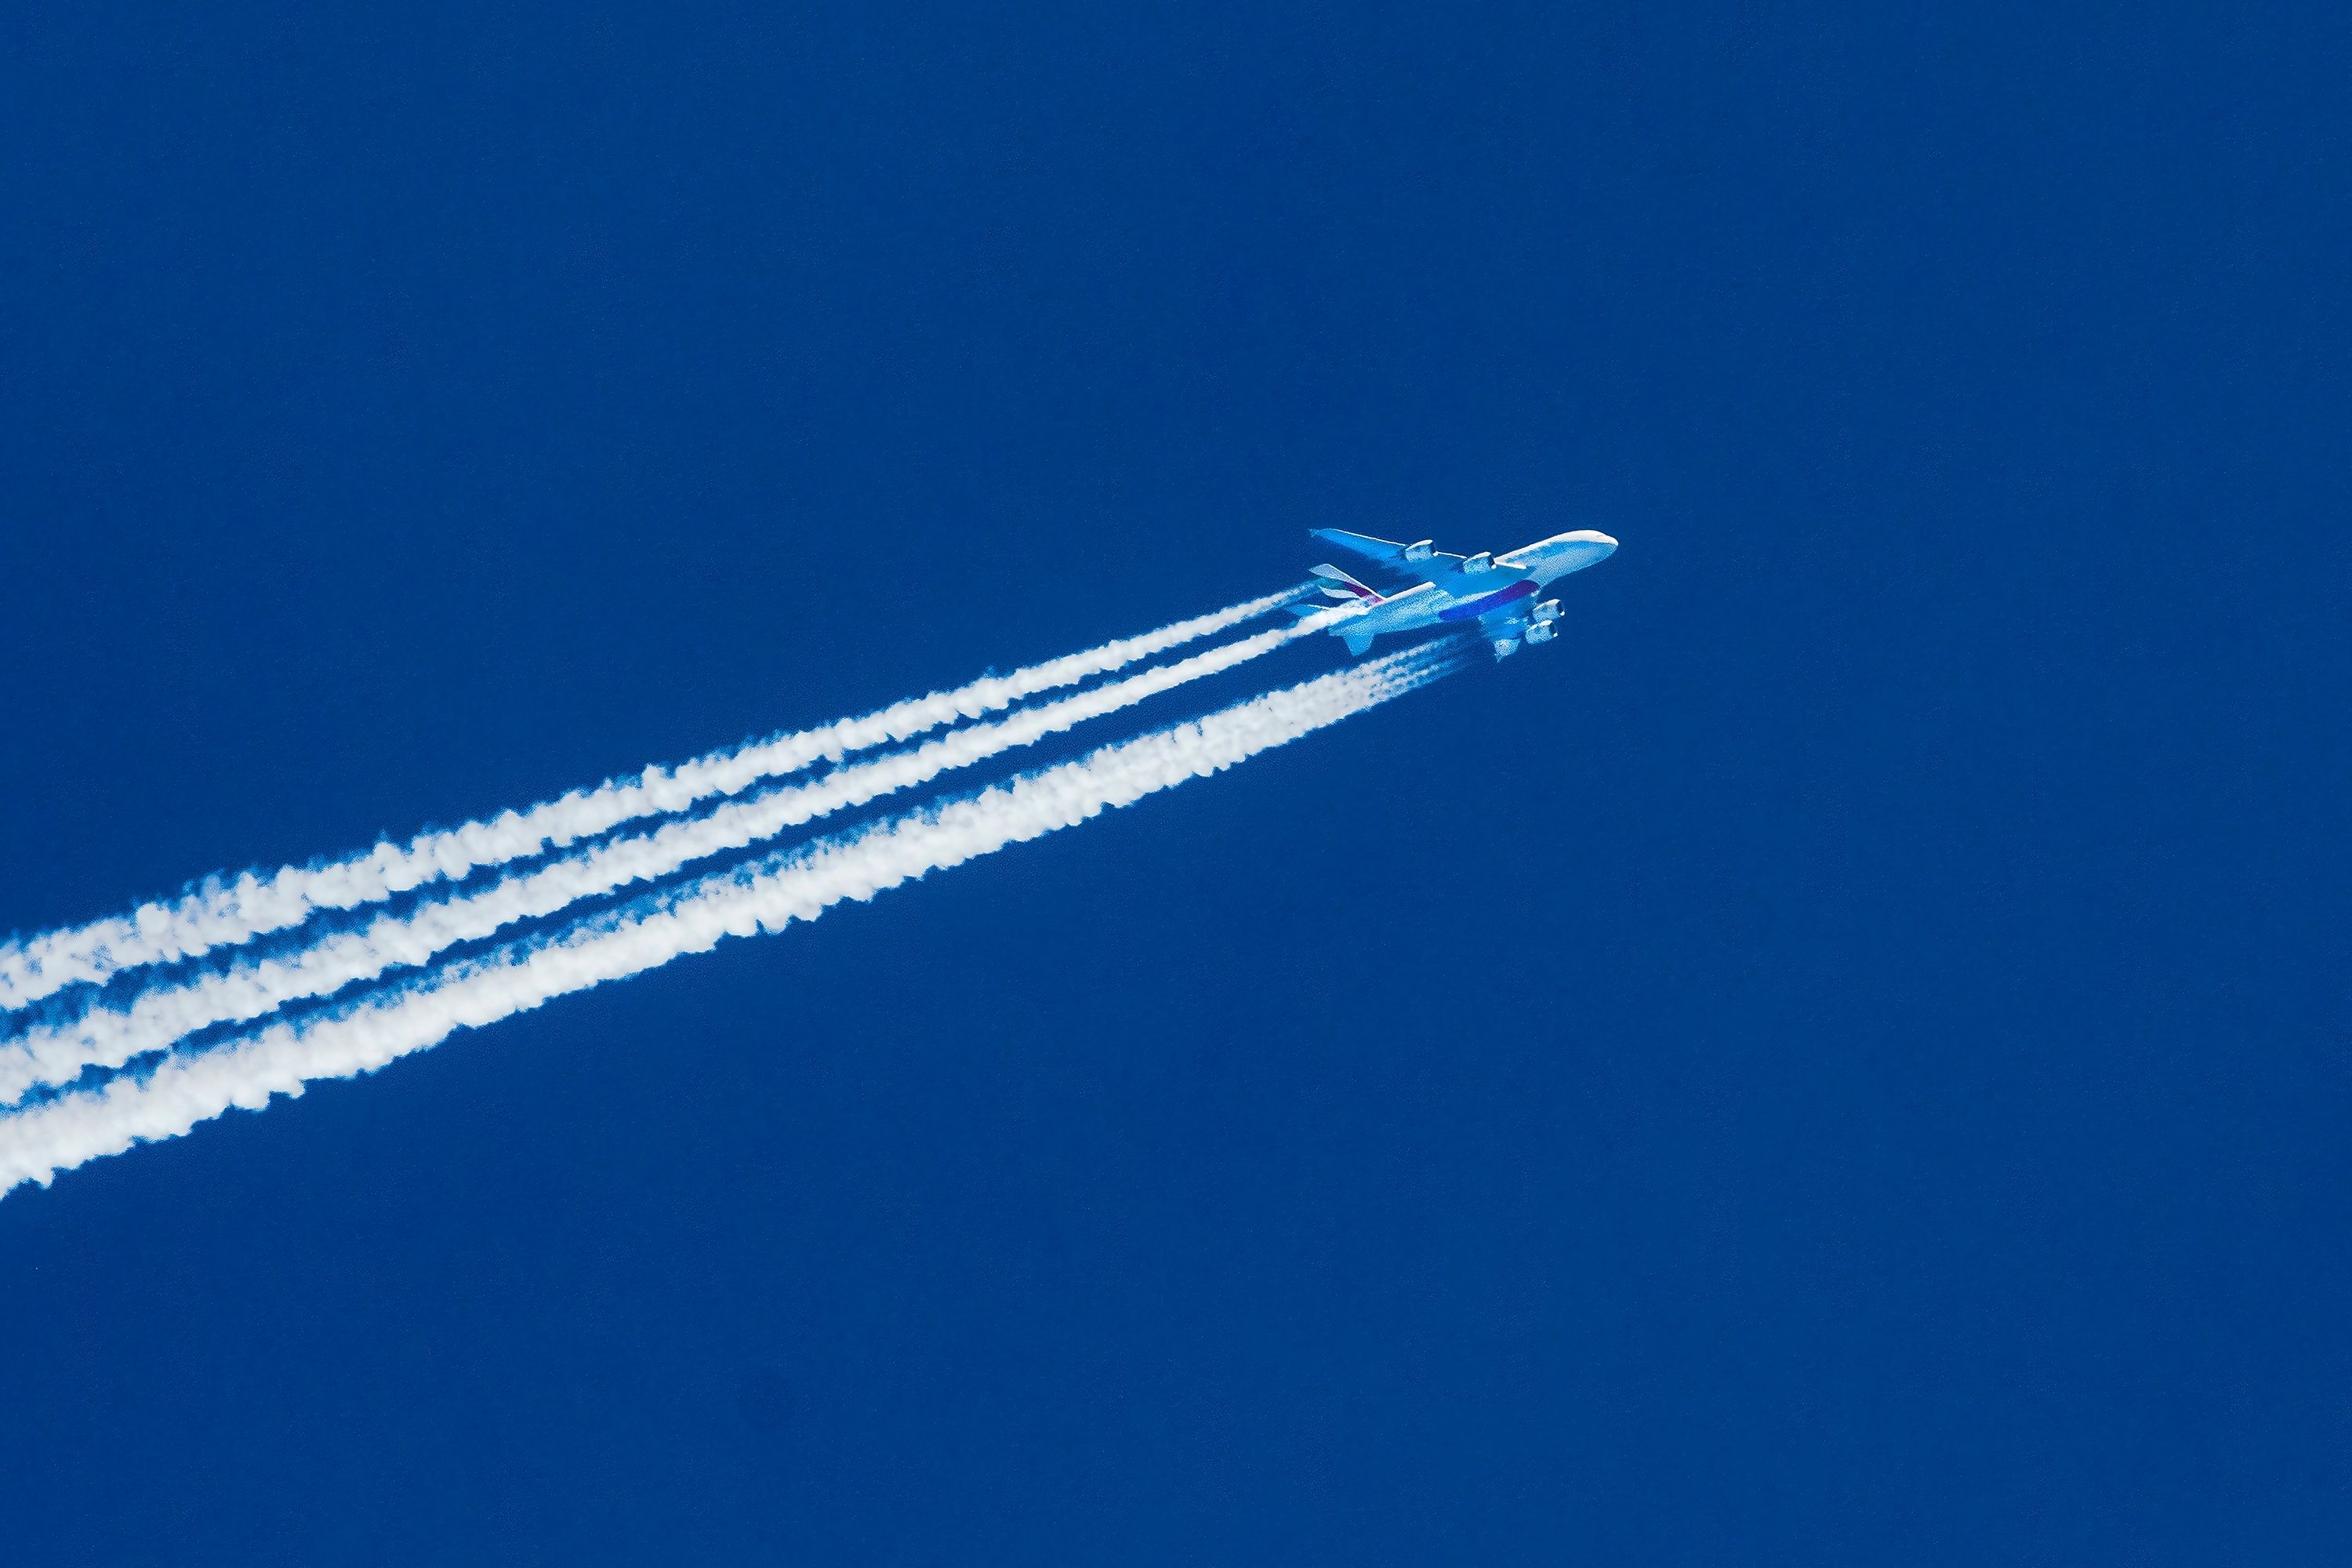 Emirates Airbus A380 Cruising With Contrails